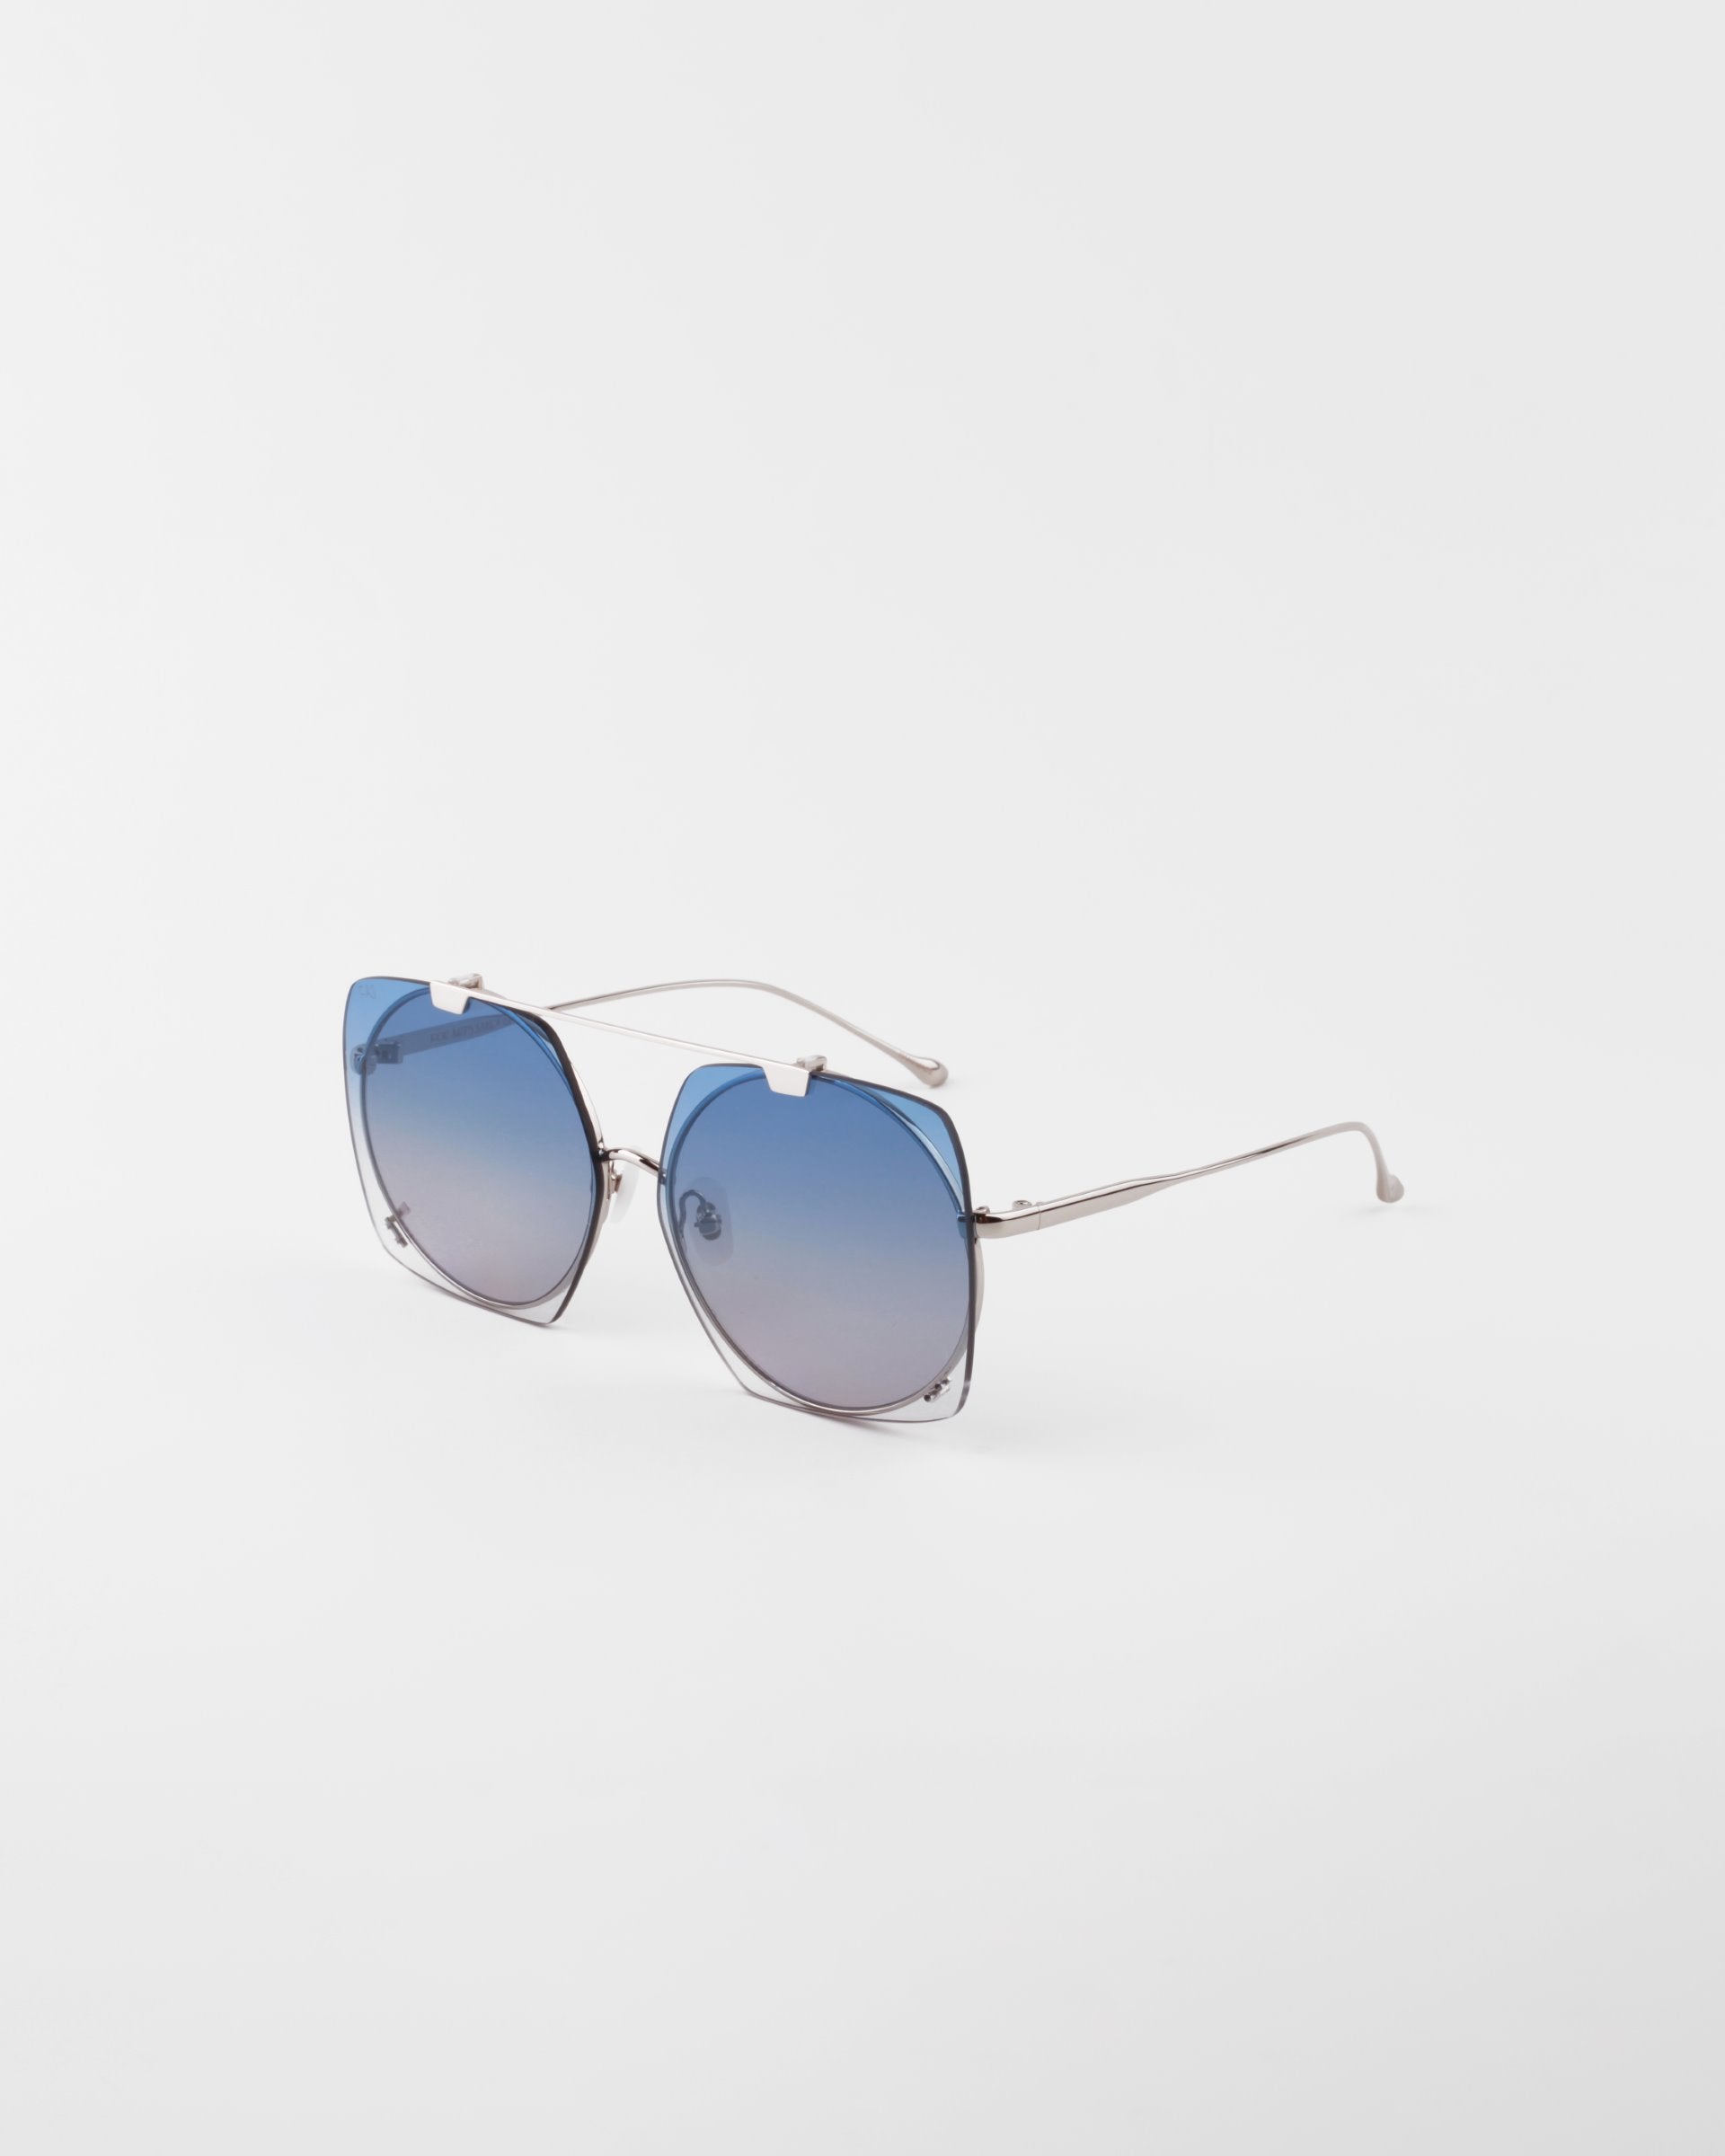 A pair of stylish, oversized Last Summer sunglasses by For Art&#39;s Sake® with blue gradient lenses and thin, 18-karat gold-plated metallic arms positioned on a white background.